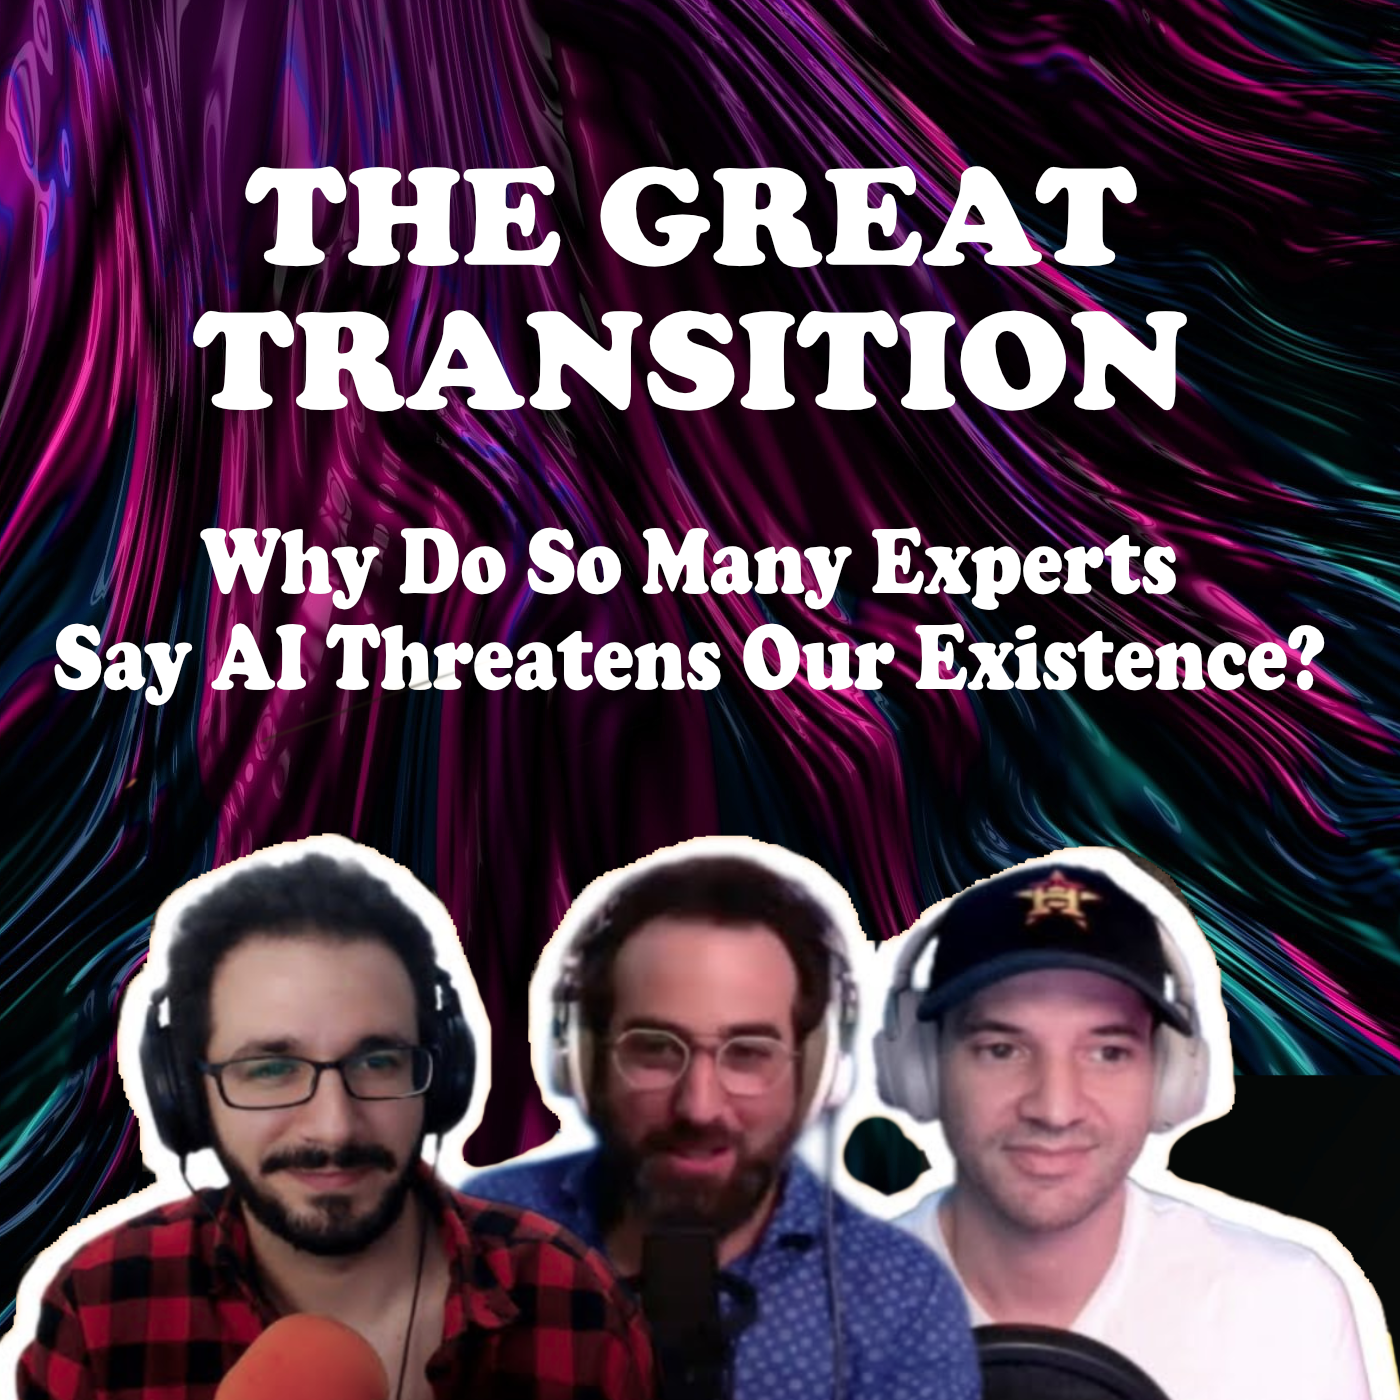 The Great Transition - Why Do So Many Experts Say AI Threatens Our Existence?